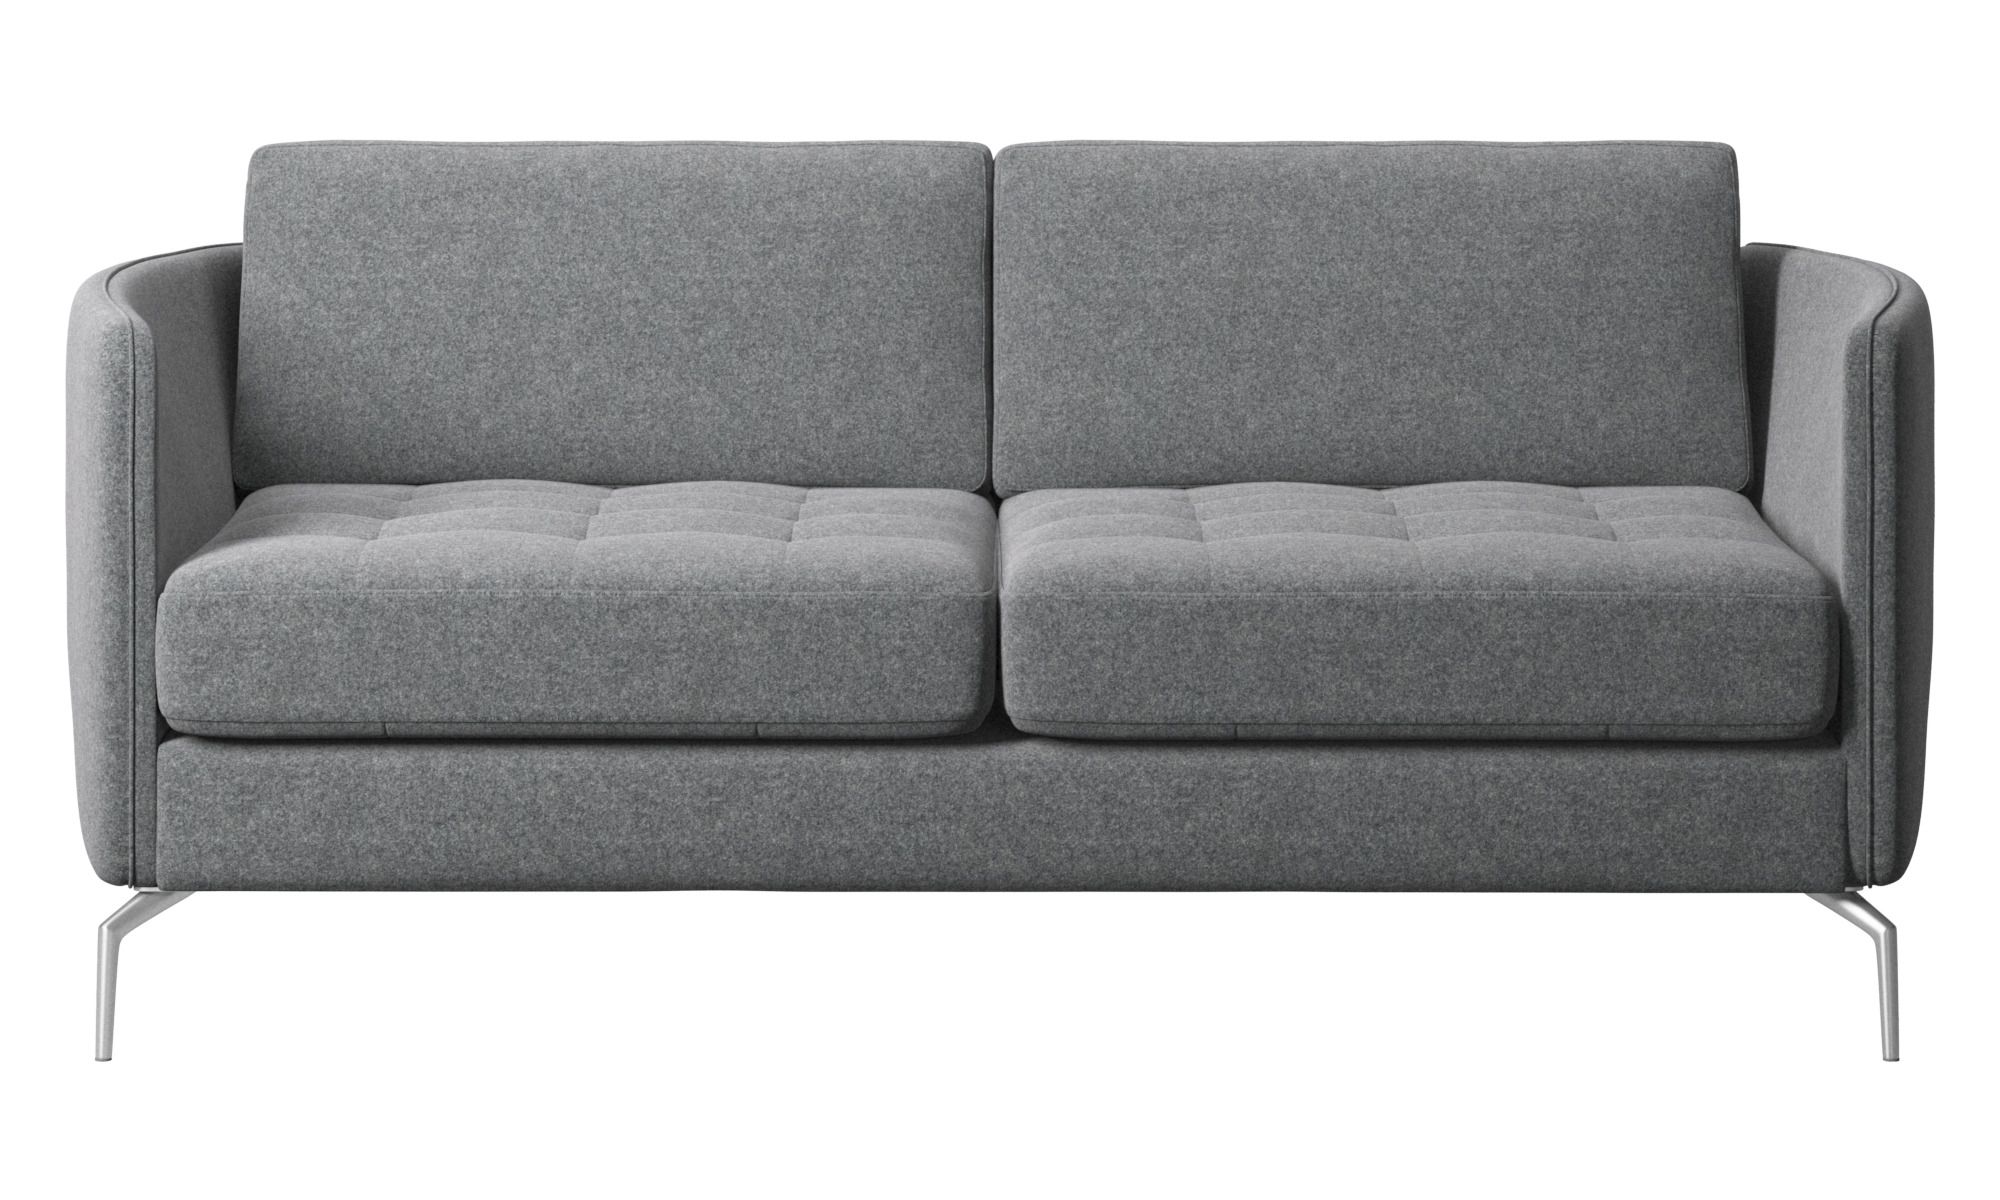 Tufted Blue Suede 3 Seat Sofa Loveseat Blue Couch Blue Inside 3pc Polyfiber Sectional Sofas With Nail Head Trim Blue/gray (View 5 of 15)